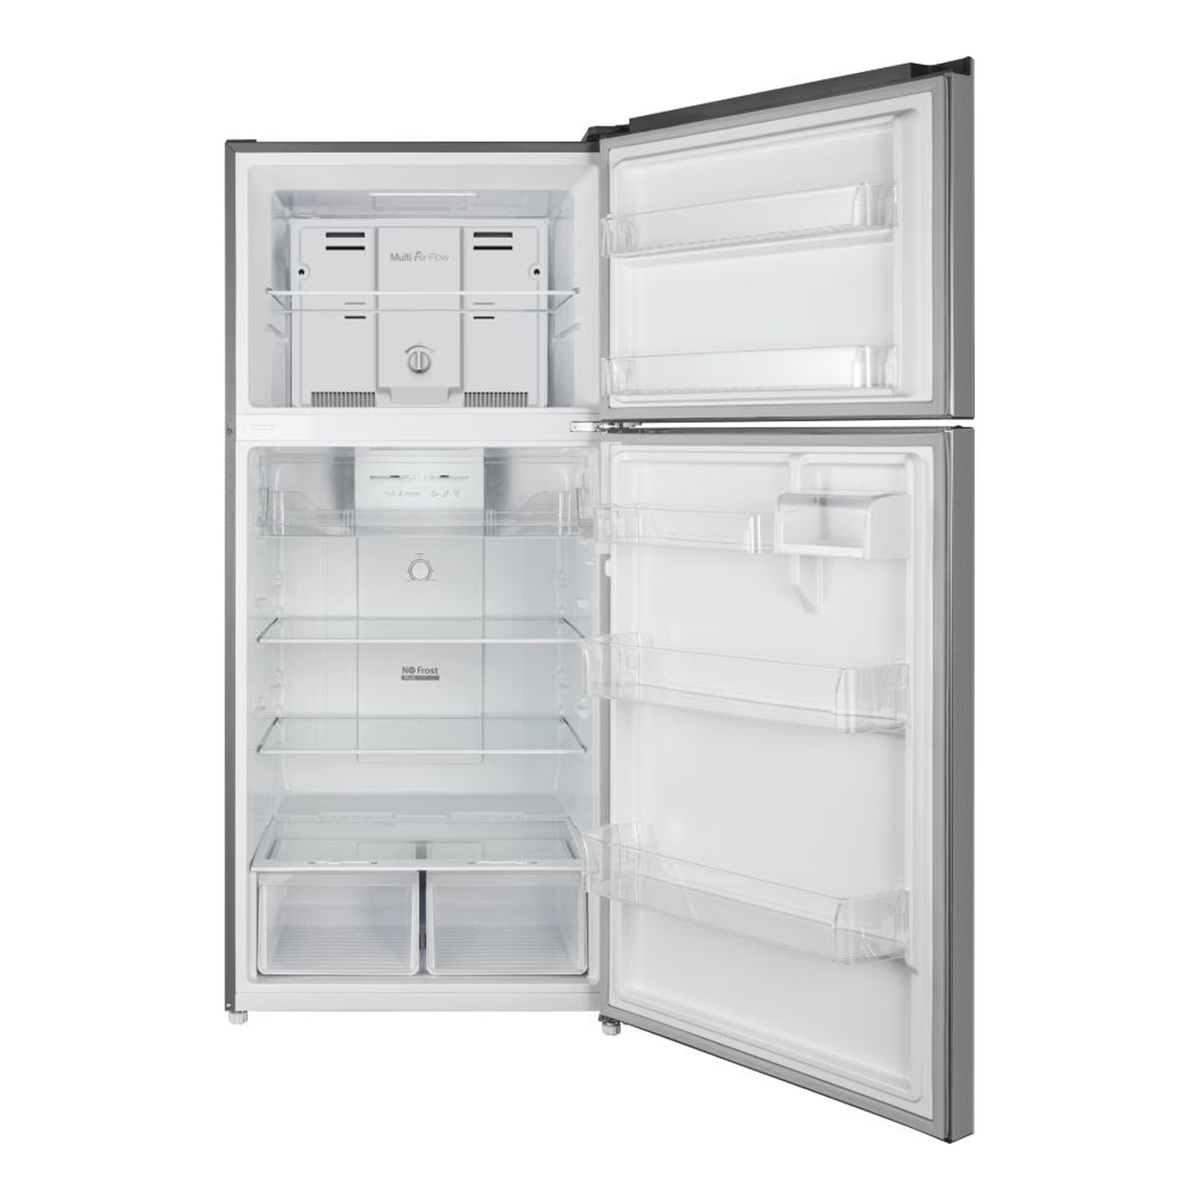 Candy Double Door Refrigerator,Inverter Motor,Silver,730LTR Gross,515L Net,Total no Frost, Electronic Control,External Display,LED Light,CCDNI-700DS-19